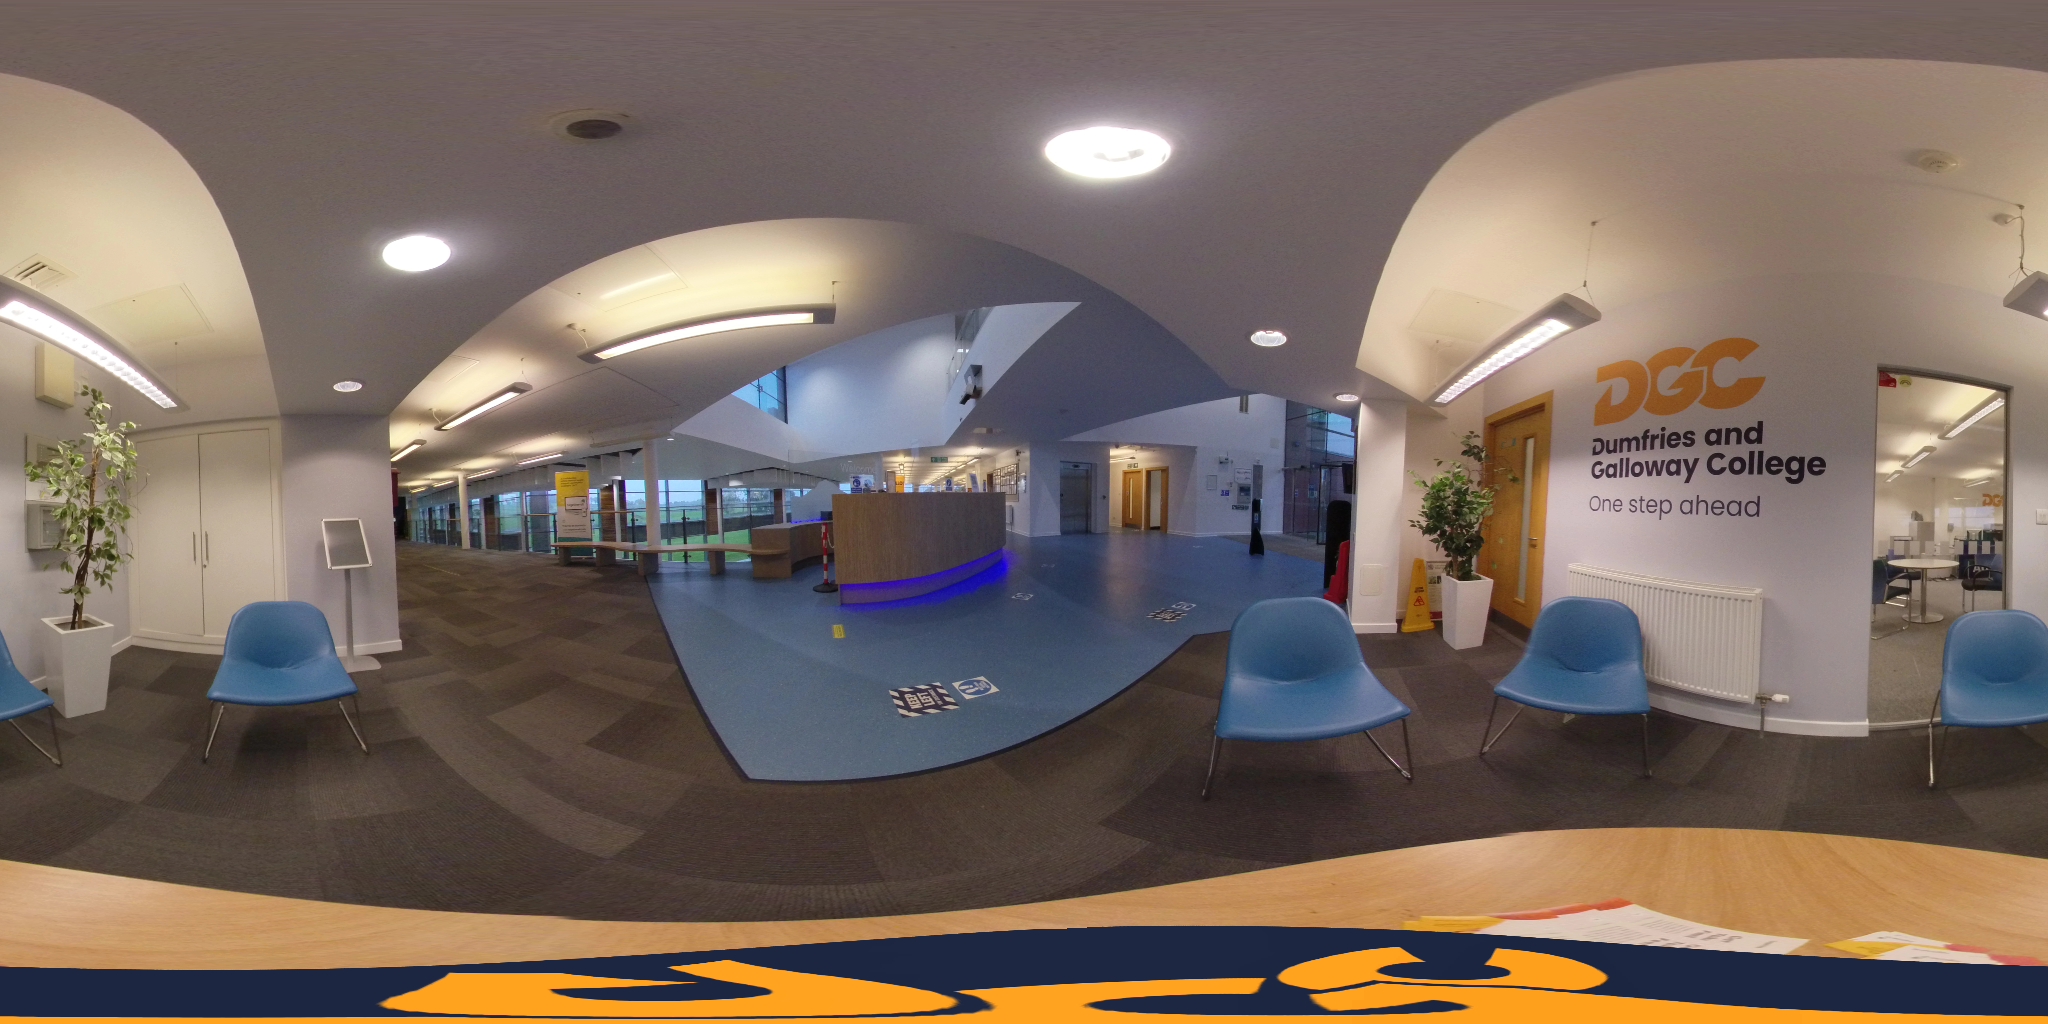 360 Photo of Dumfries Campus Reception Area